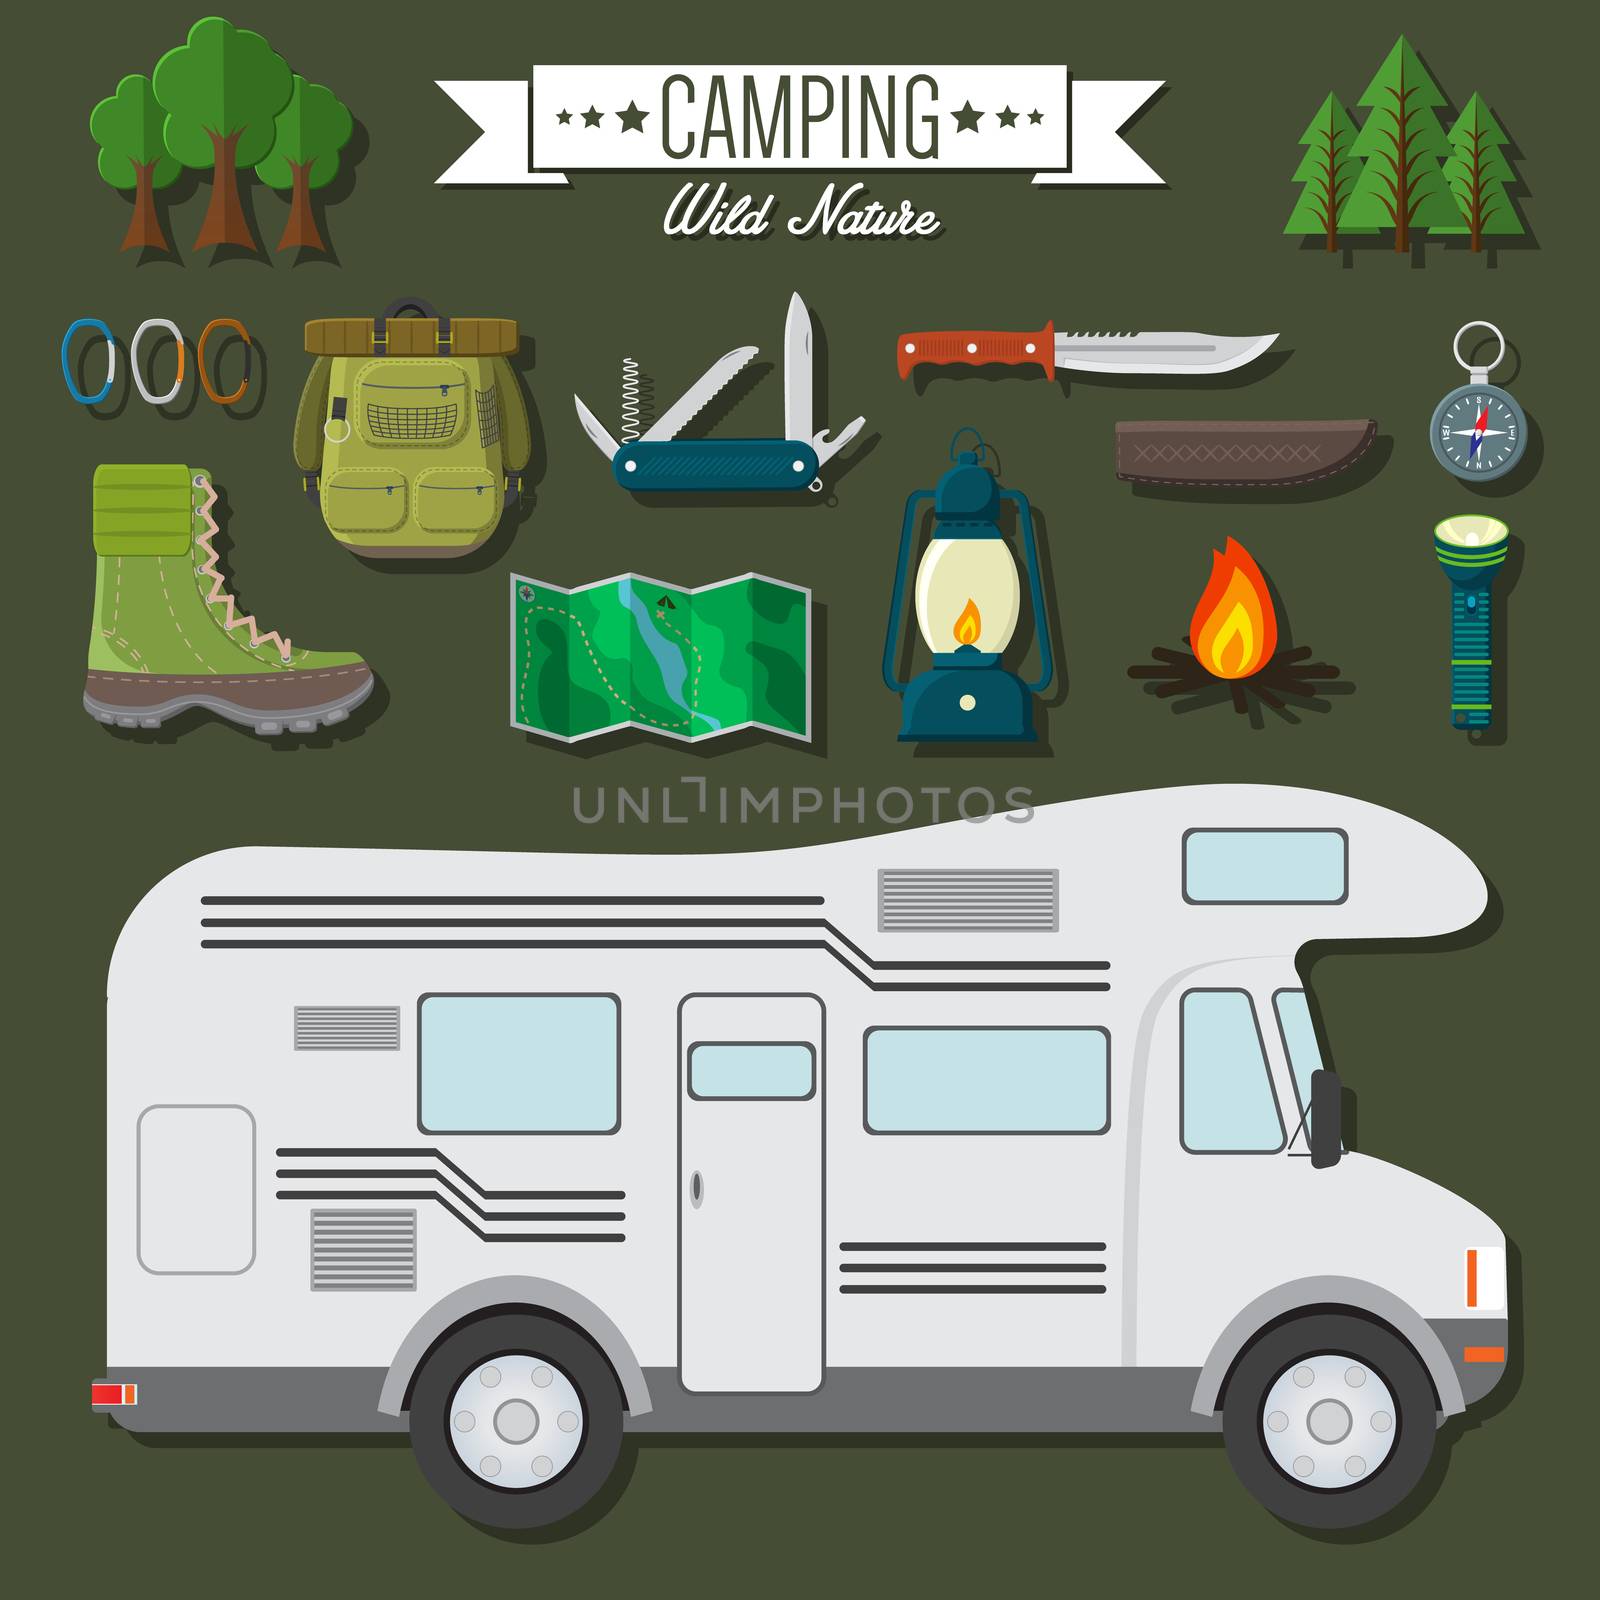 Flat design modern vector illustration of travel and vacation set. Camping and hiking equipment items, car RV, knife and backpack, hiking boots, lantern and bonfire, map and compass, trees and flashlight.